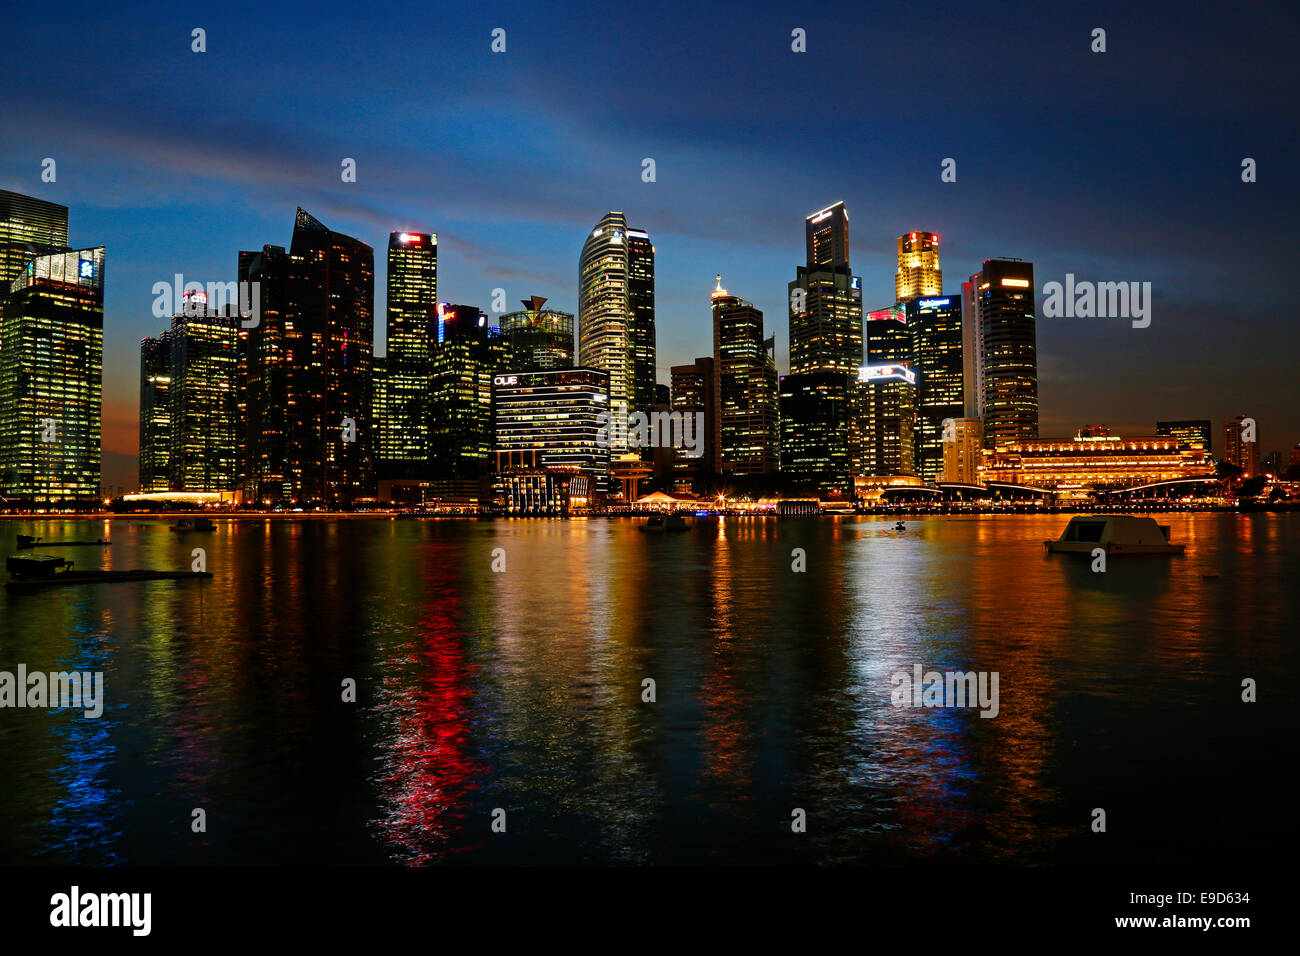 Singapore skyline of the Financial District at dusk from Marina Bay, Singapore Stock Photo